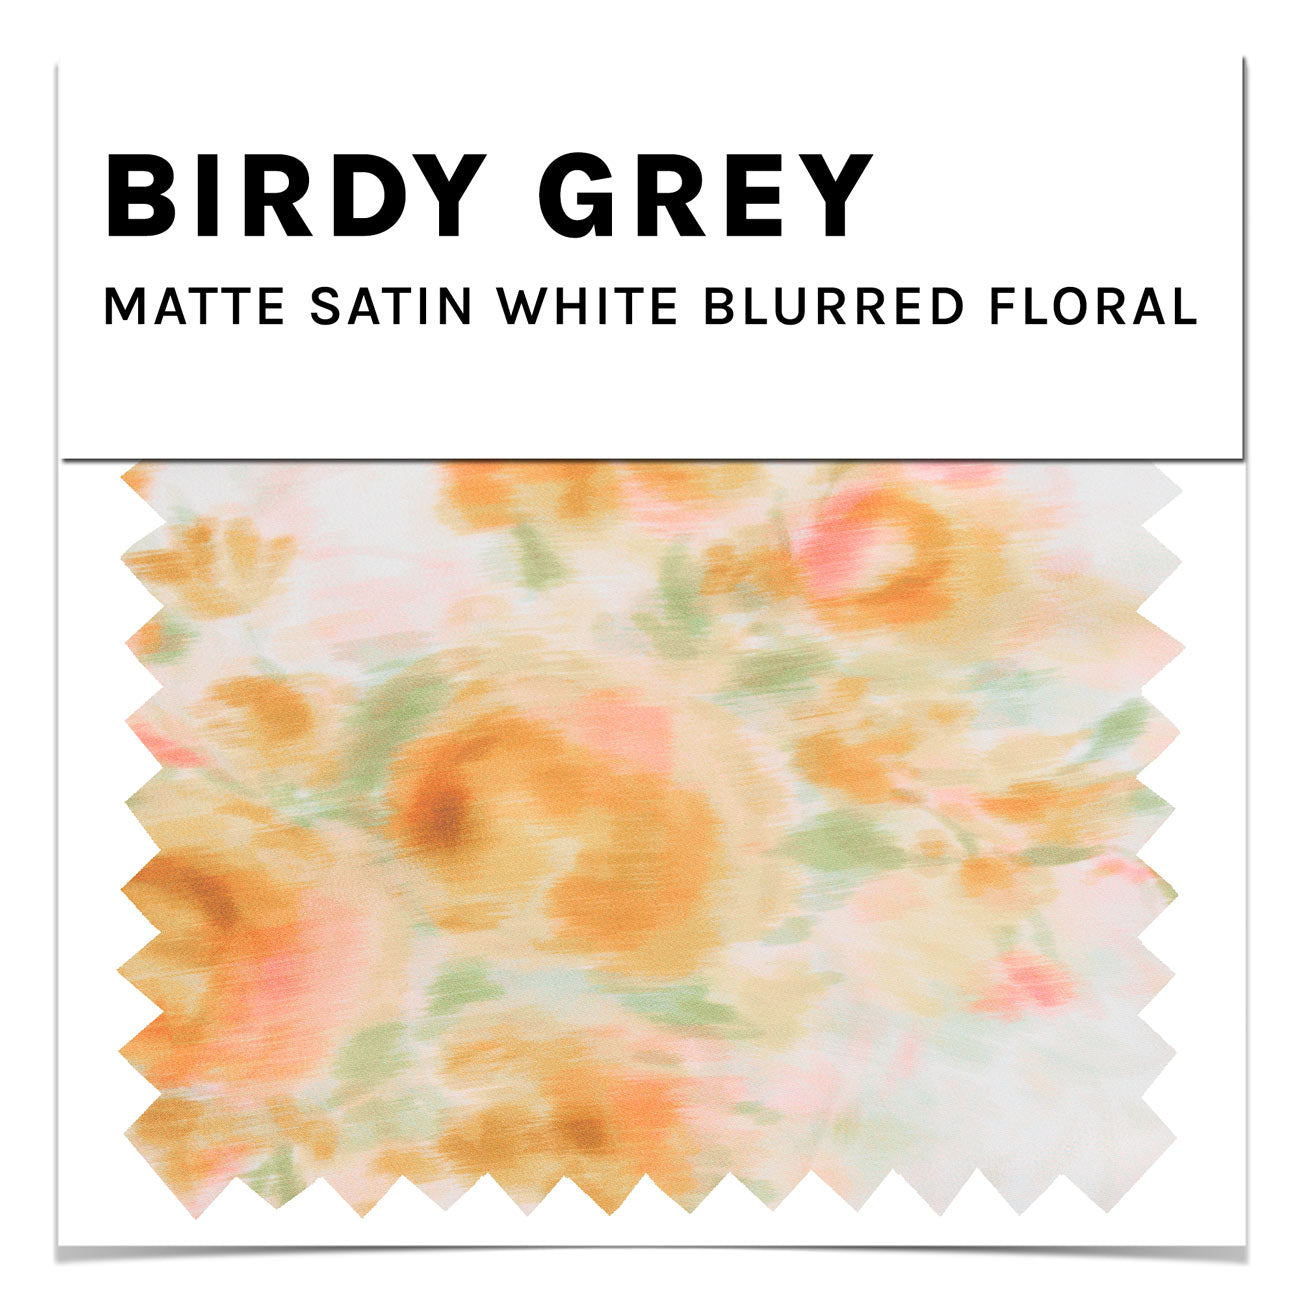 Matte Satin Swatch in White Blurred Floral by Birdy Grey